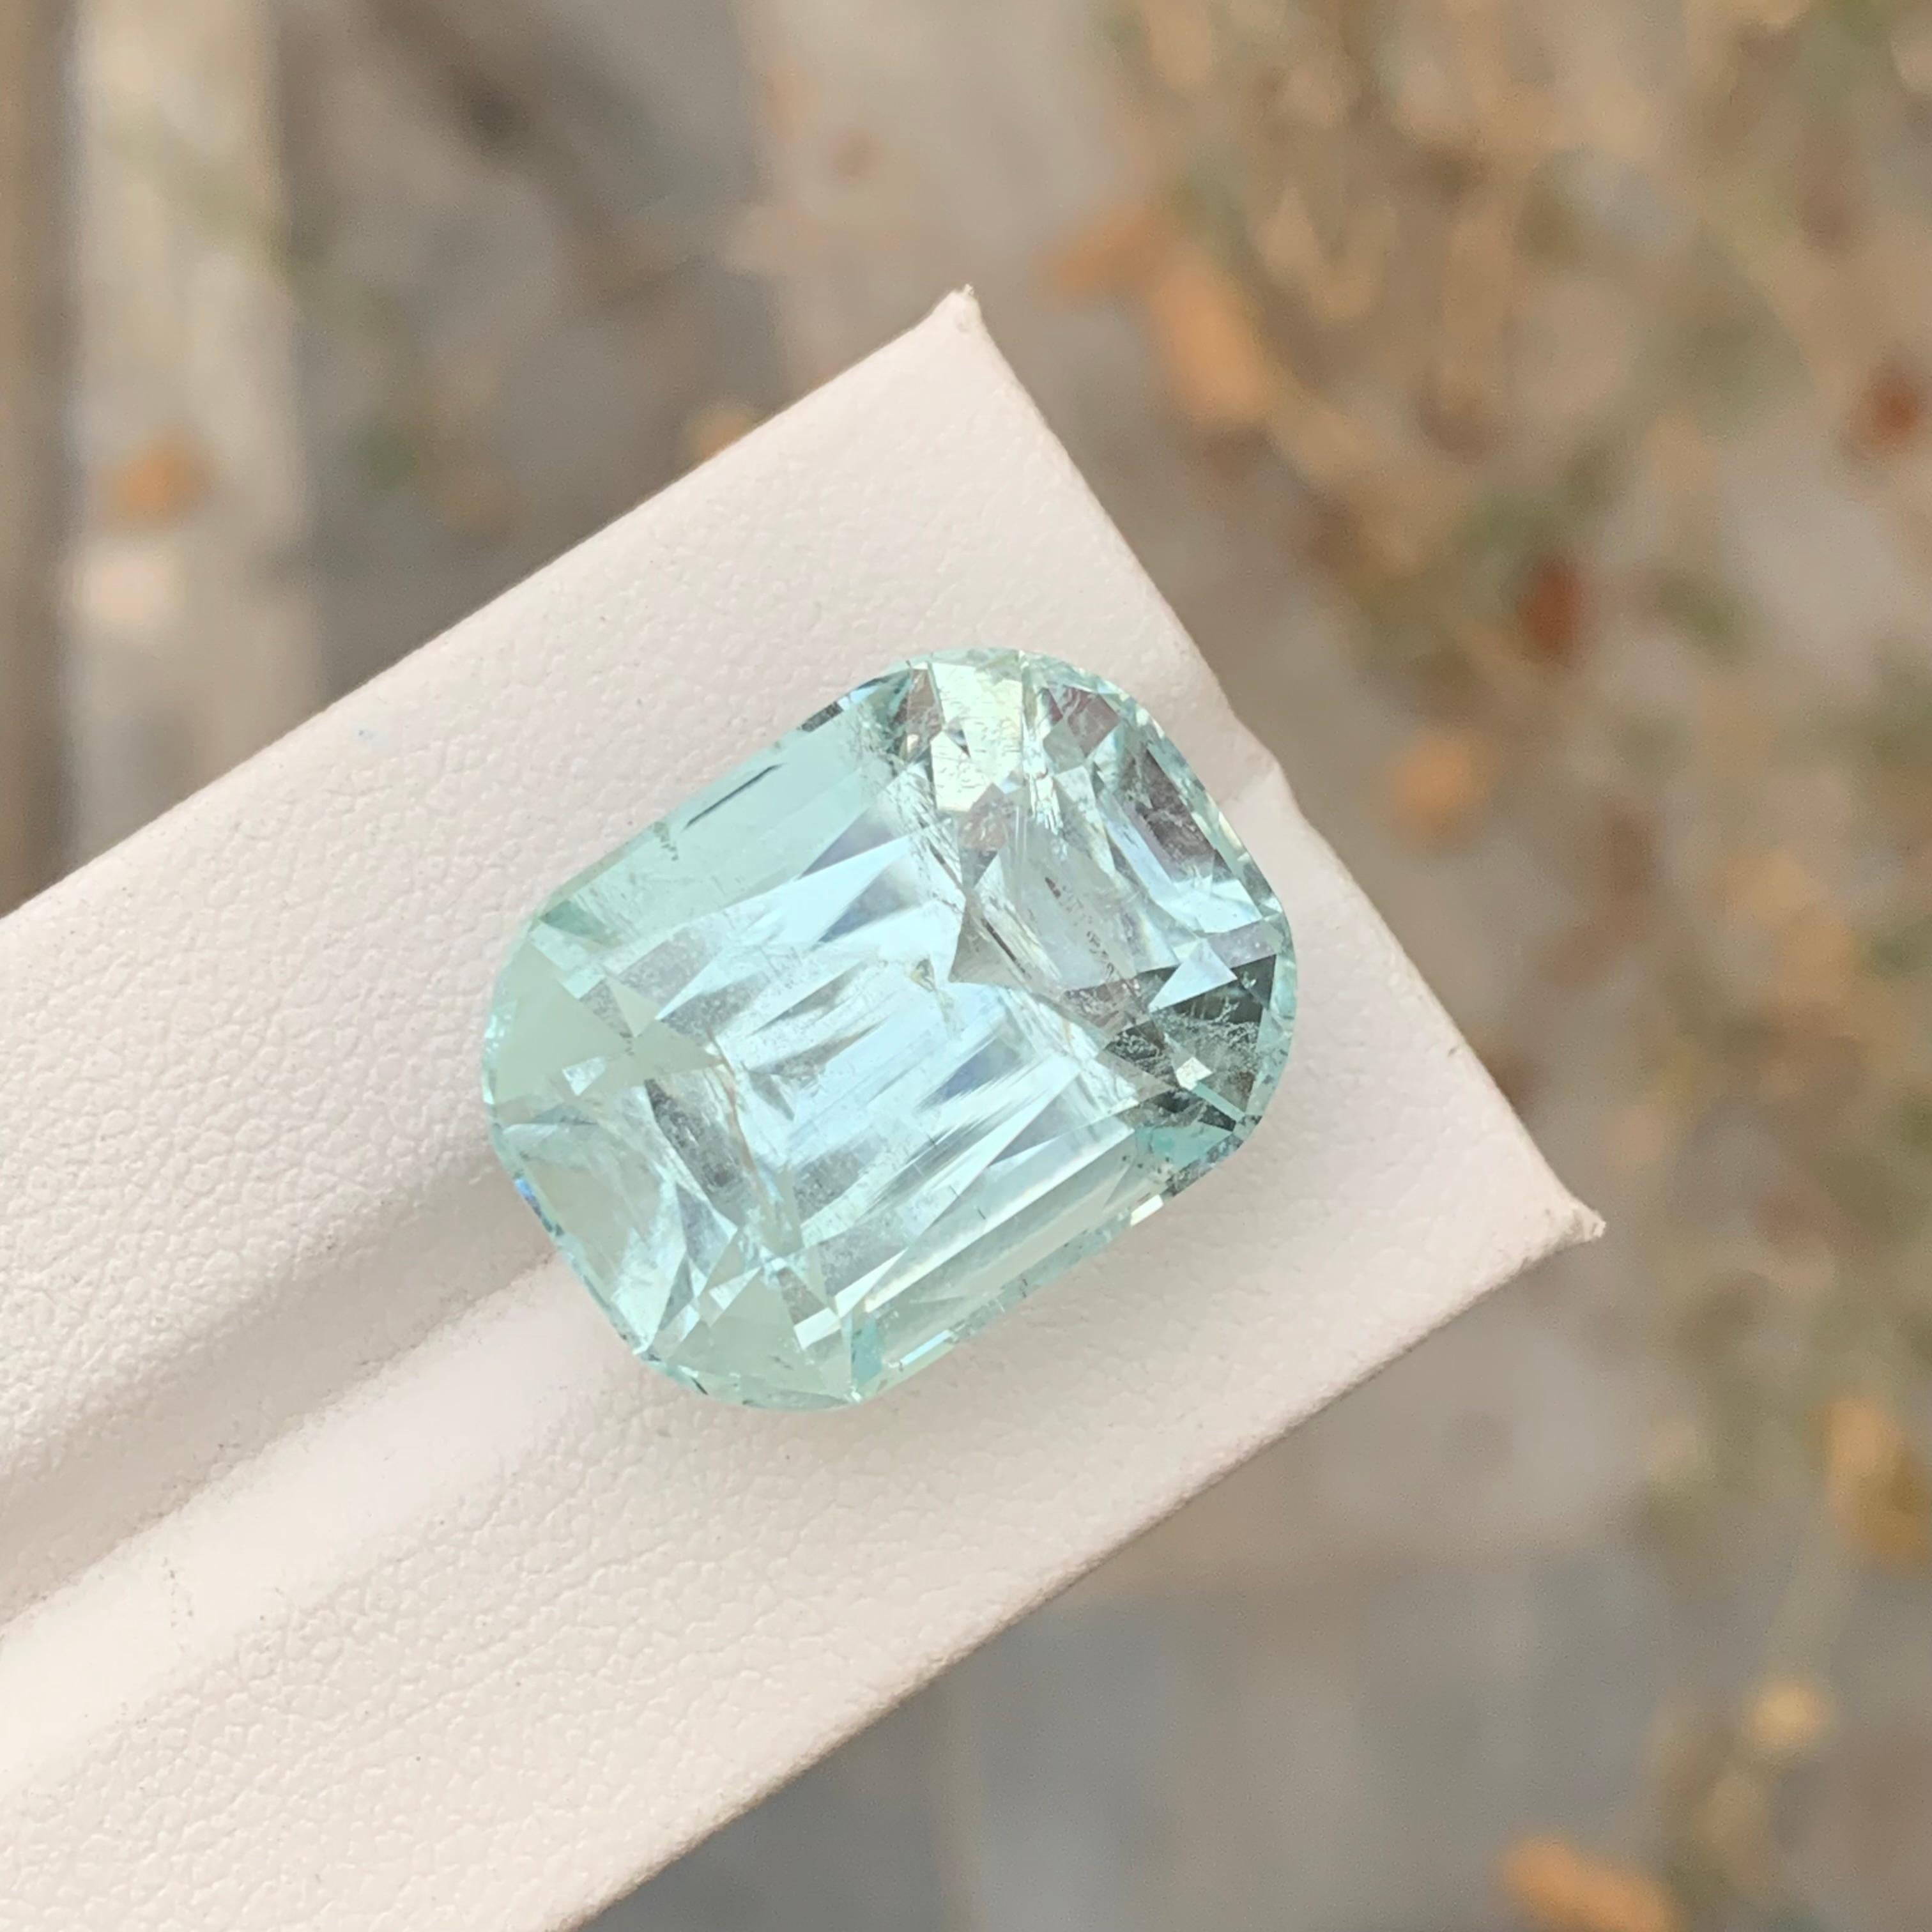 29.75 Carats Gigantic Natural Loose Aquamarine Included Gem For Necklace Jewelry For Sale 1